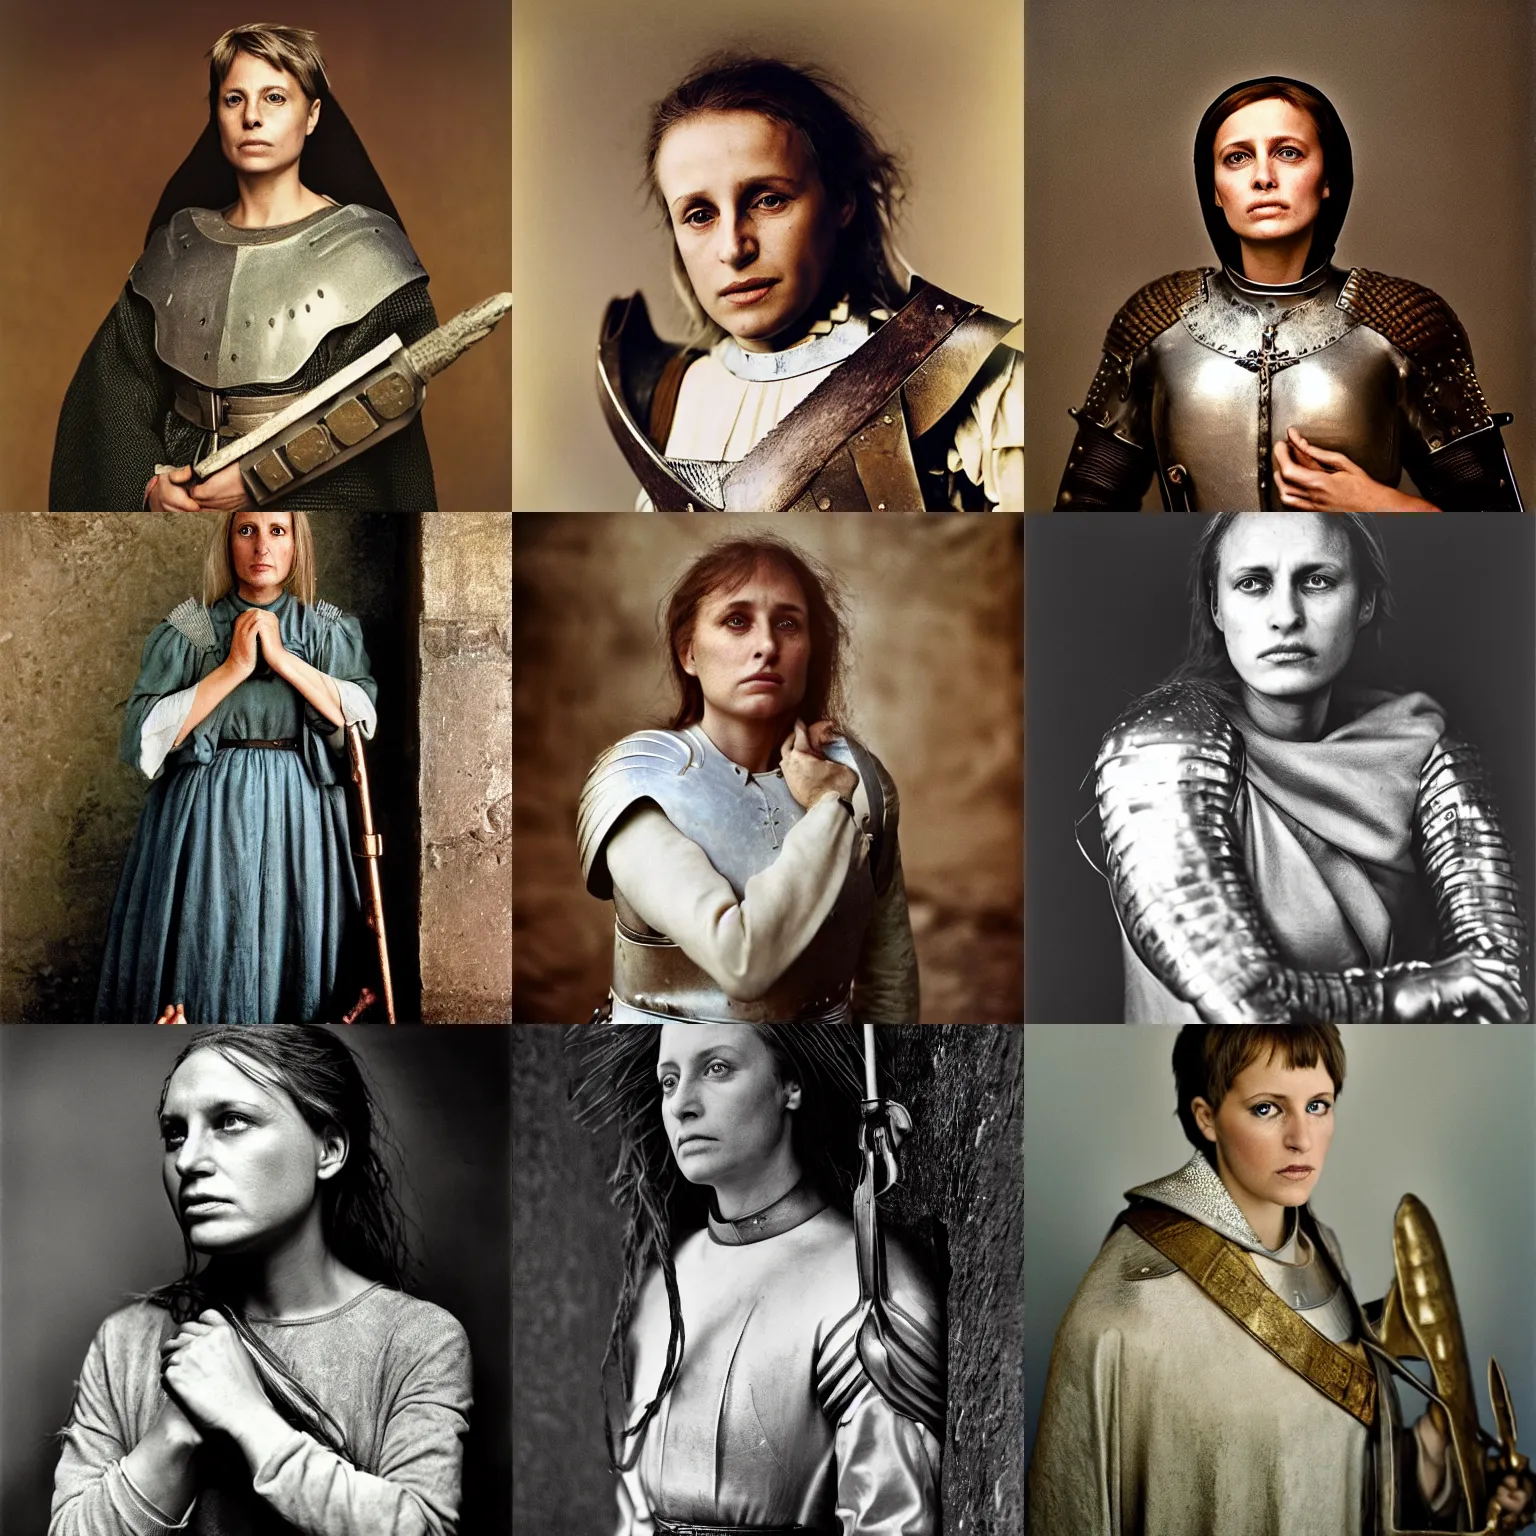 Prompt: Joan of Arc, candid portrait photography by Annie Liebovitz